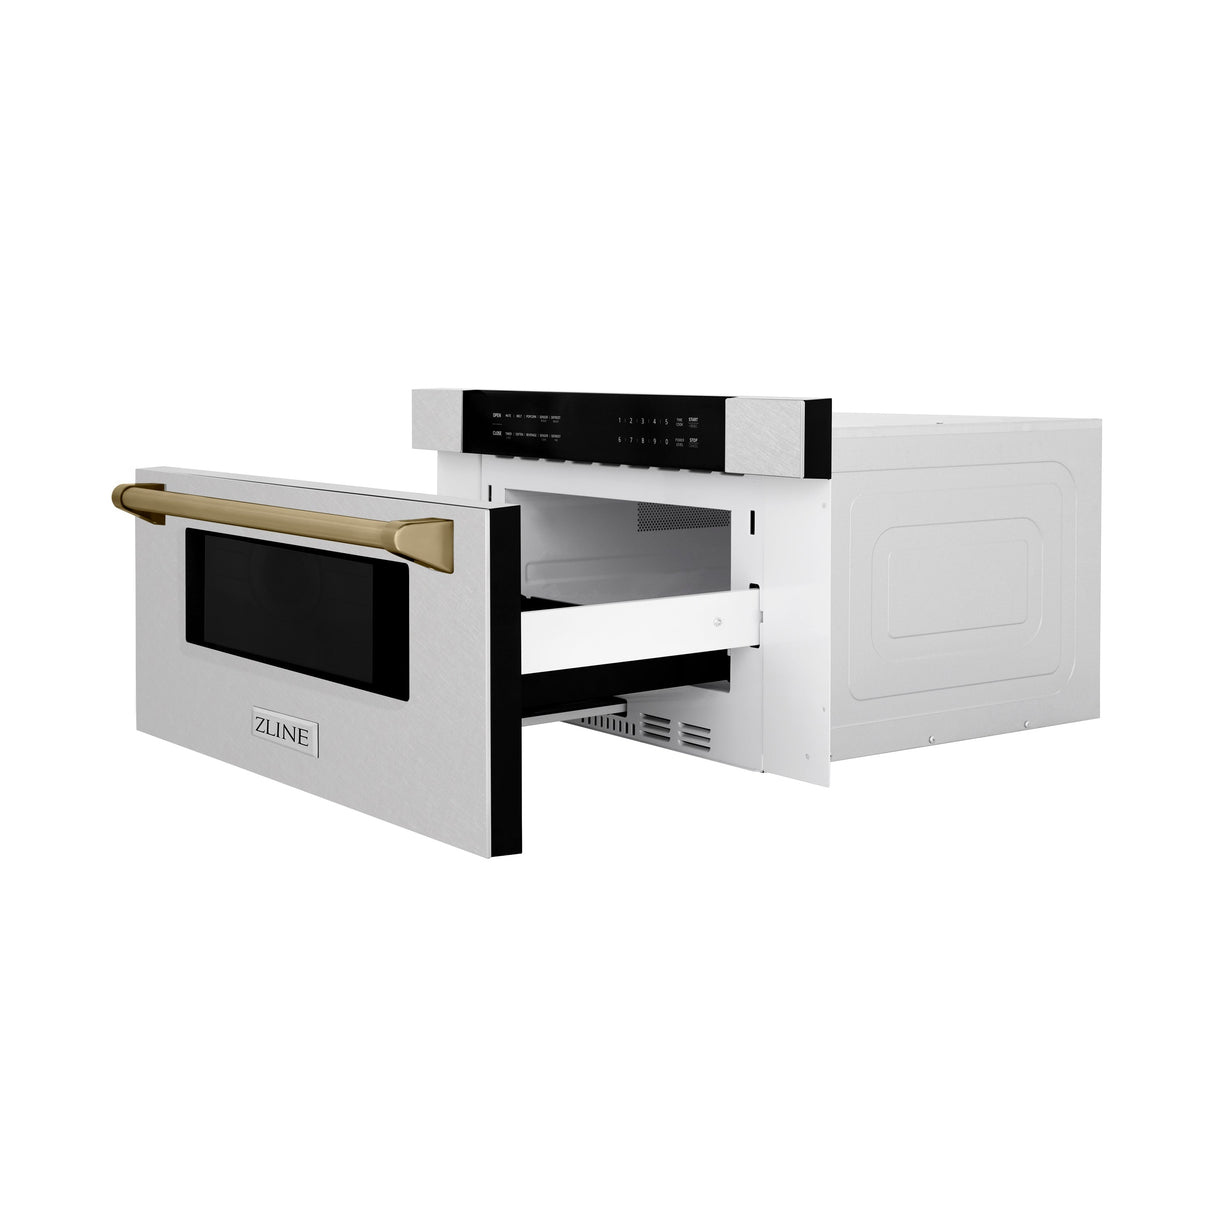 ZLINE Autograph Edition 30 in. 1.2 cu. ft. Built-In Microwave Drawer in Fingerprint Resistant Stainless Steel with Champagne Bronze Accents (MWDZ-30-SS-CB)